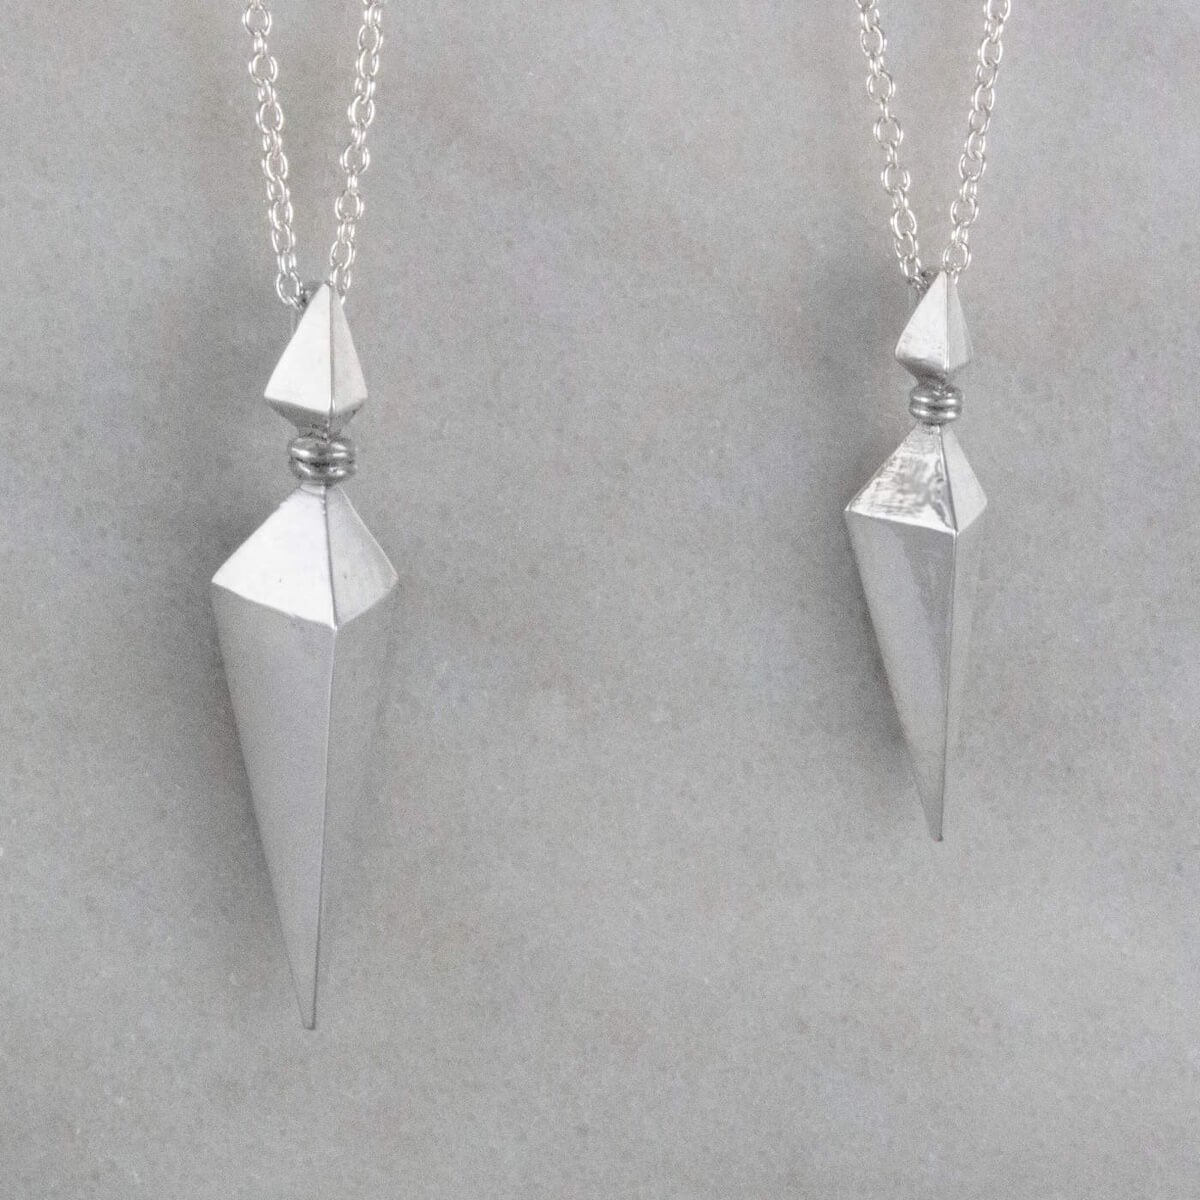 Large and Small Silver Pyramid Spike Pendants on Silver Chains Angled View